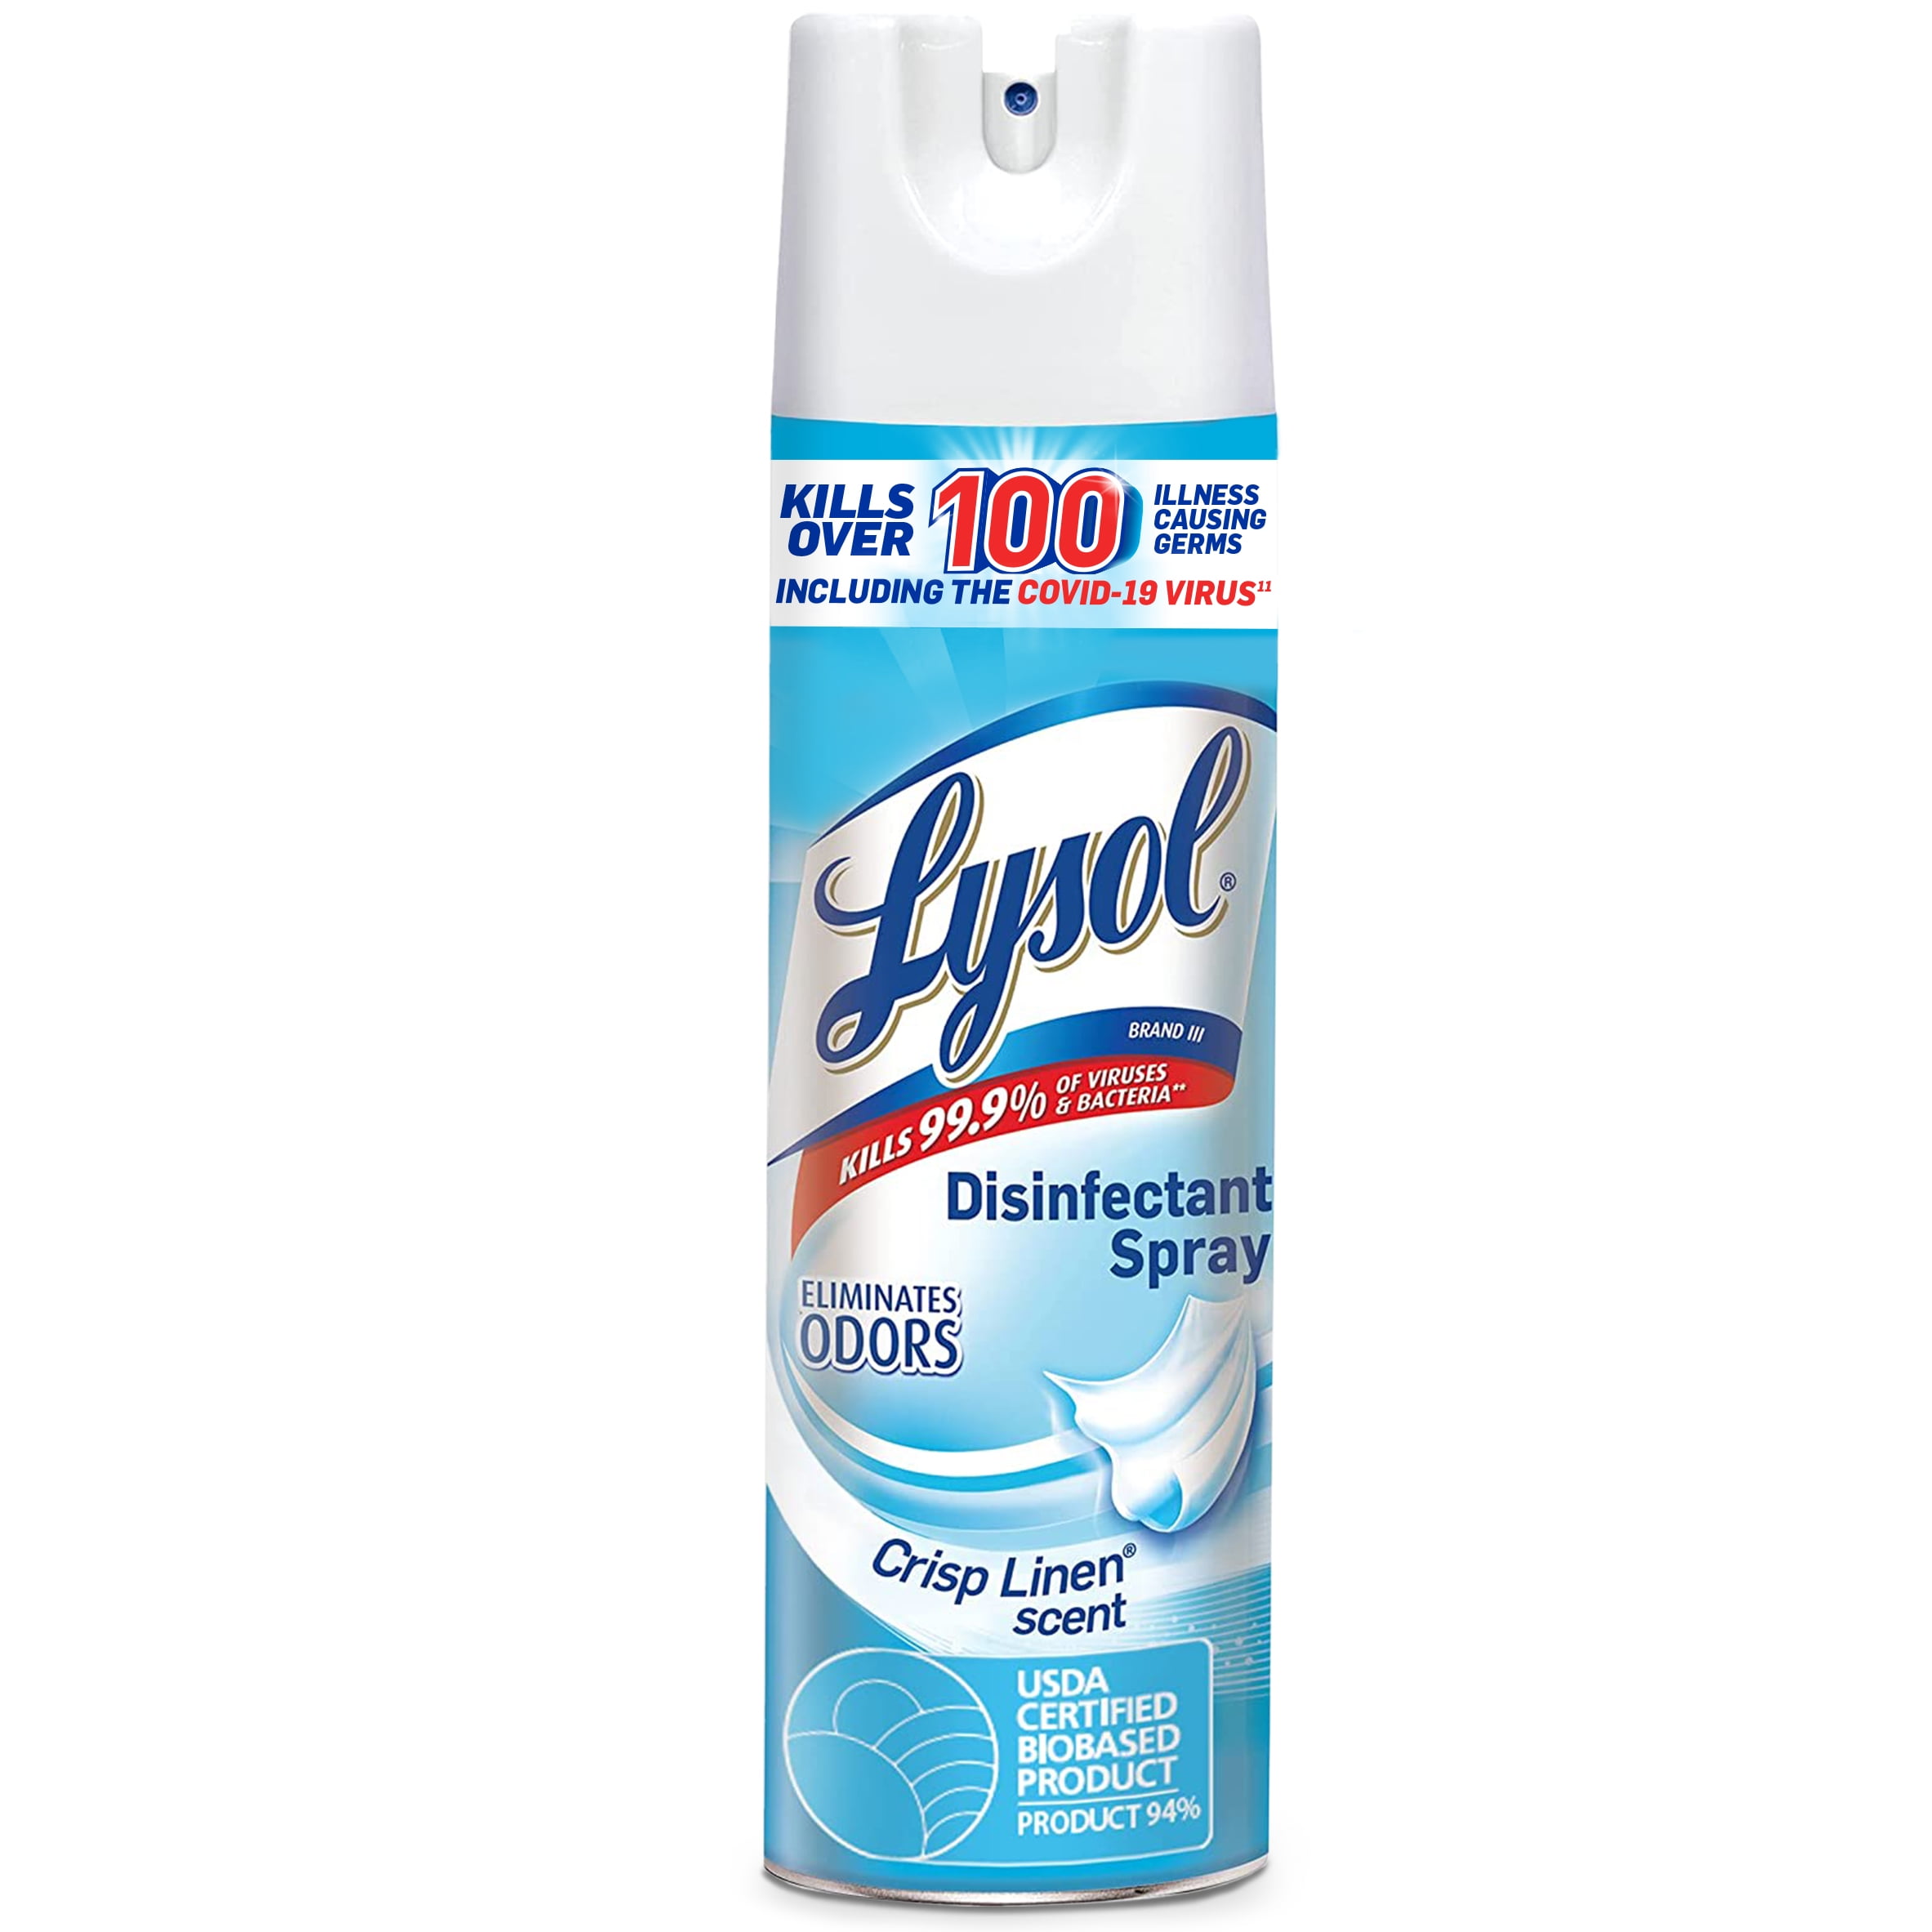 Lysol Disinfectant Spray, Sanitizing and Antibacterial Spray, For Disinfecting and Deodorizing, Crisp Linen, 19 fl oz